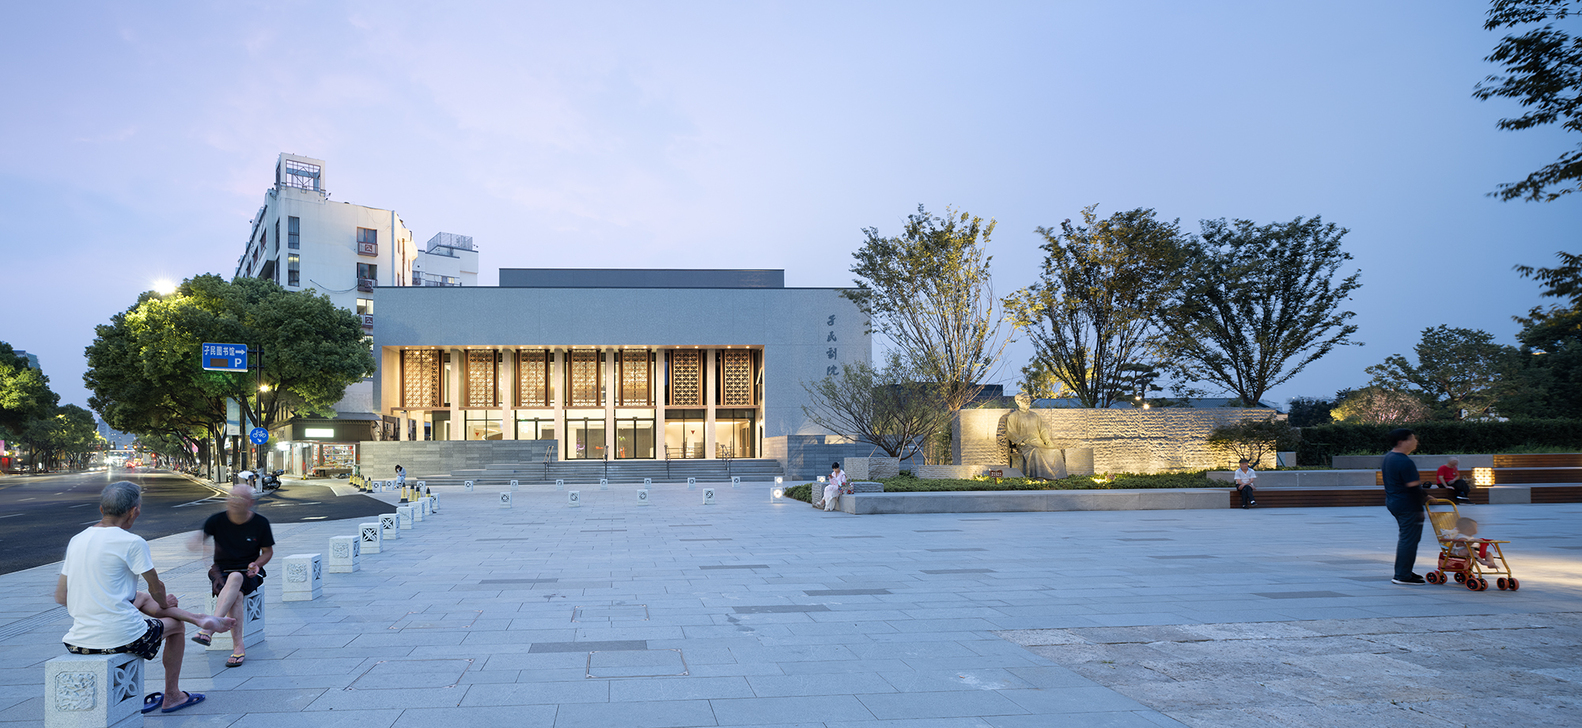 Cai Yuanpei Square and Jiemin Library: The Architectural Symphony of Shaoxing’s Historical Block